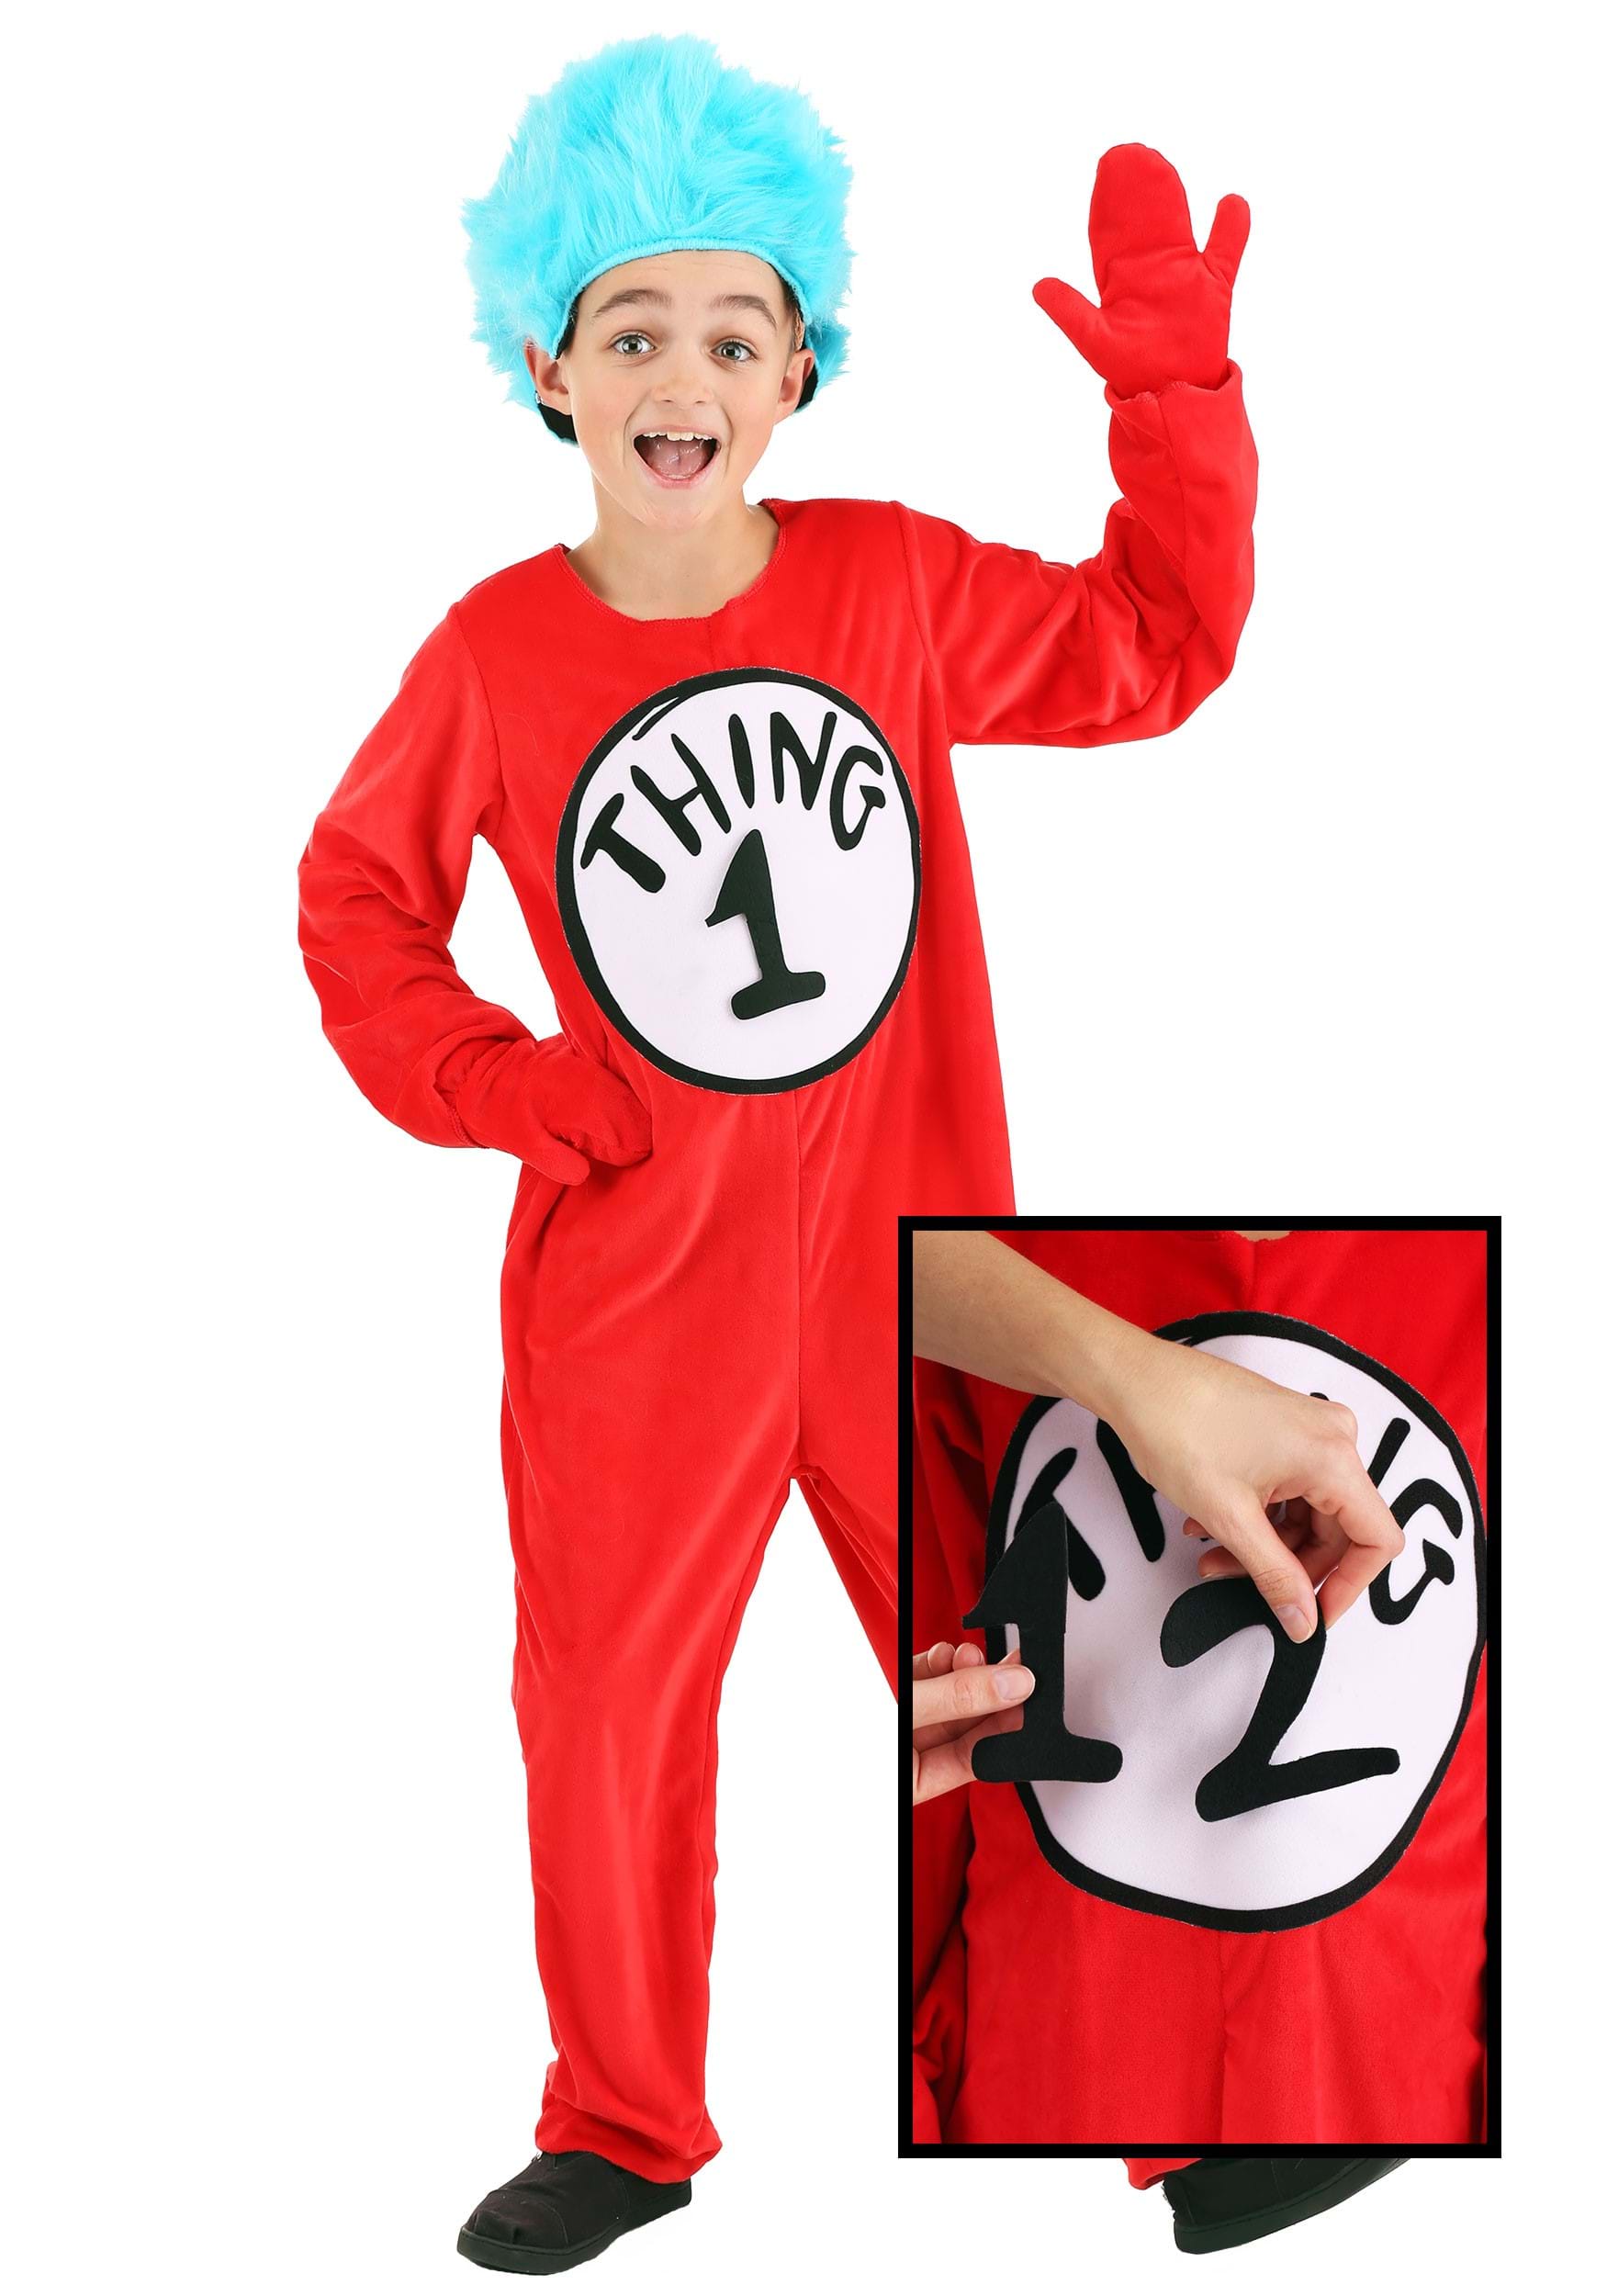 Photos - Fancy Dress FUN Costumes Thing 1&2 Deluxe Child Costume Red/Blue/White EL40062